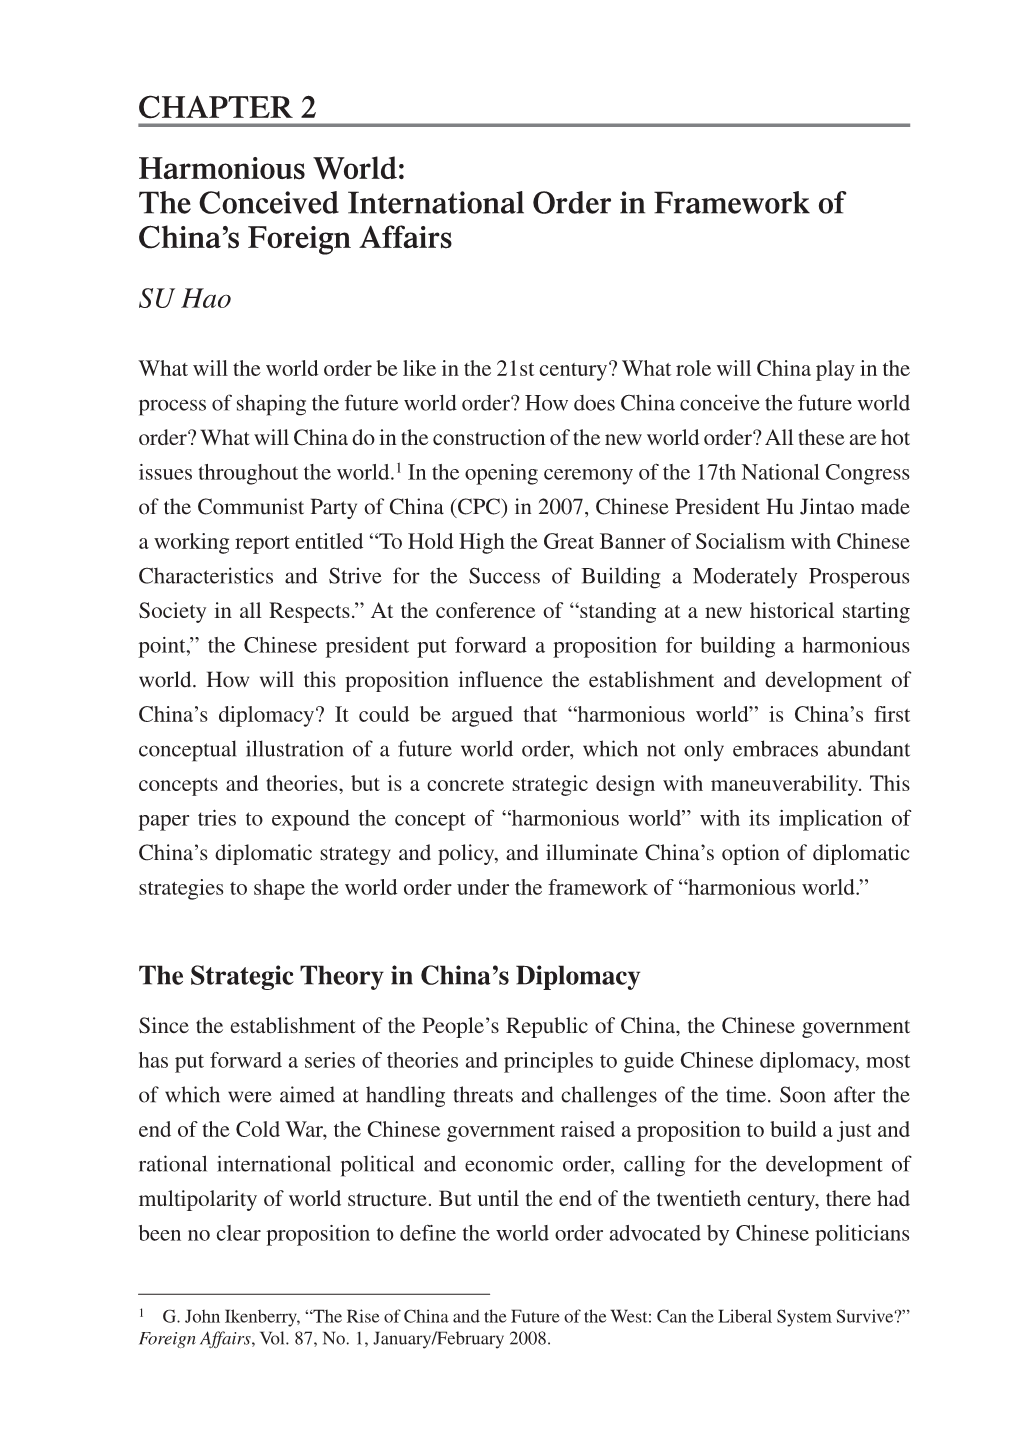 Harmonious World: the Conceived International Order in Framework of China’S Foreign Affairs